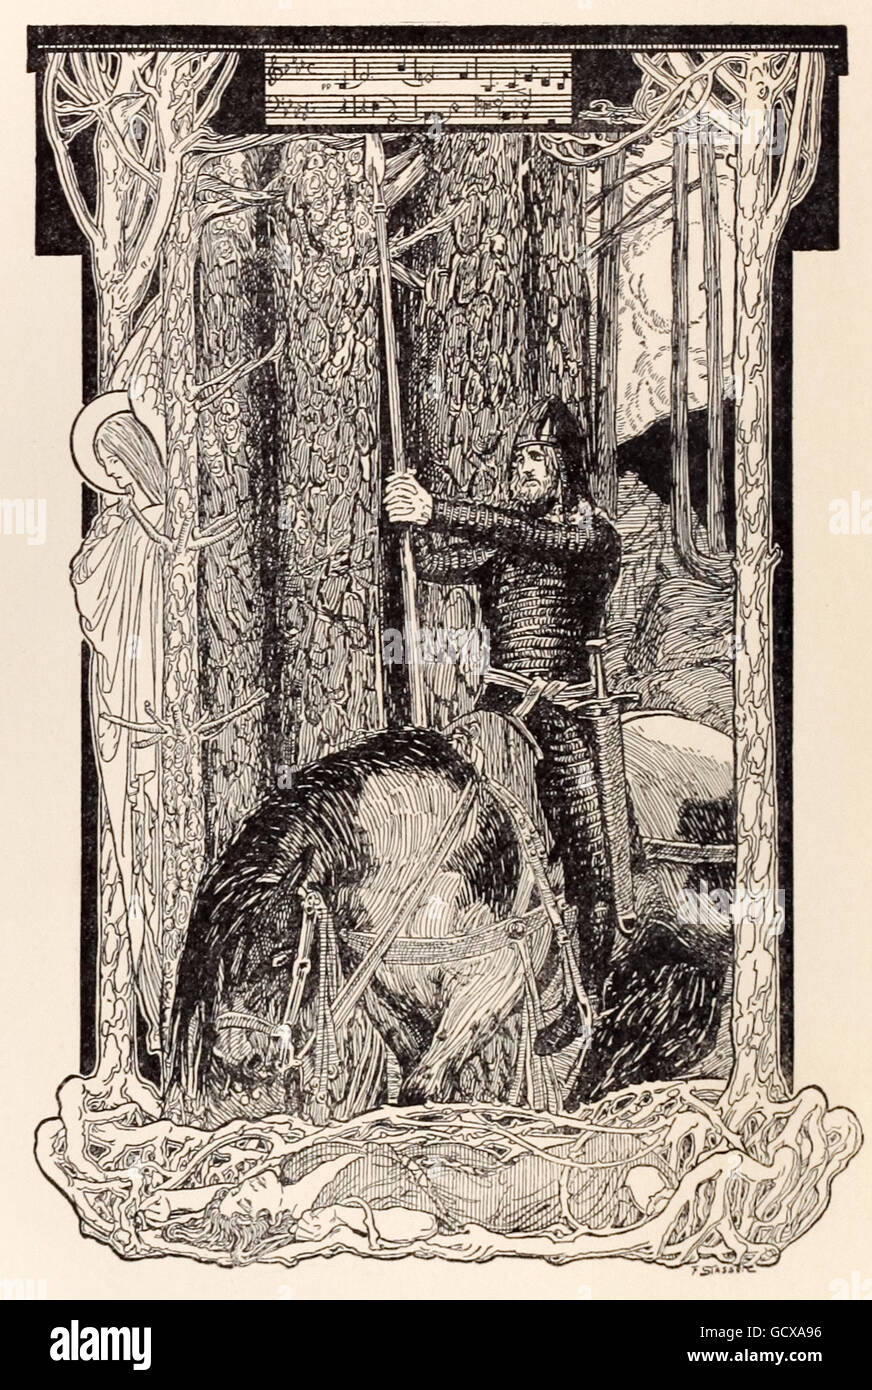 “Parsifal in Quest of the Holy Grail.” Franz Stassen (1869-1949) illustration for “Parsifal” by Richard Wagner (1813-1883). See description for more information. Stock Photo